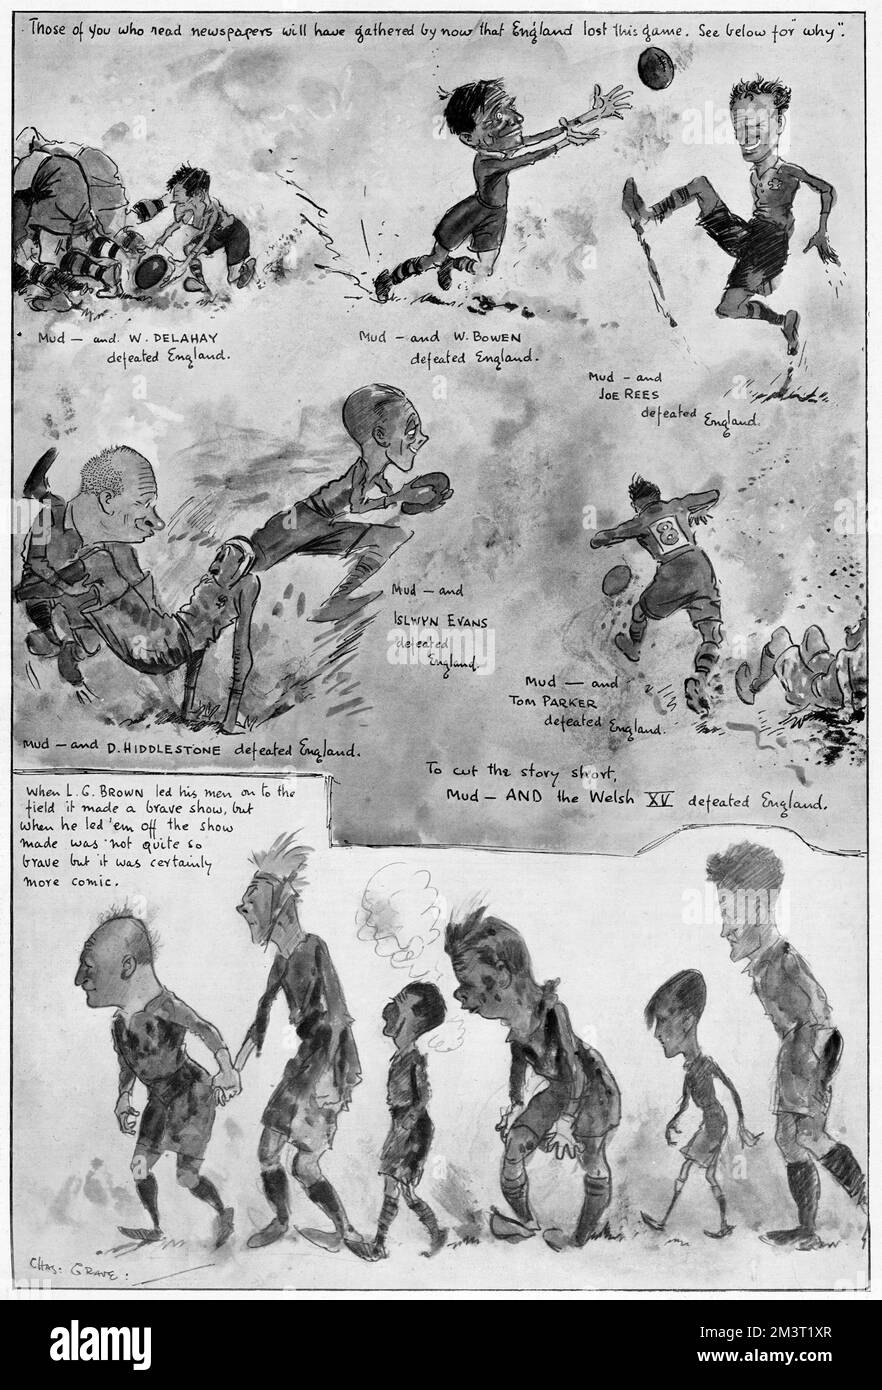 England v Wales rugby match at Cardiff Arms Park. A heavy defeat for England explained in this cartoon: 'to cut the story short, mud - AND the Welsh XV defeated England.' Stock Photo